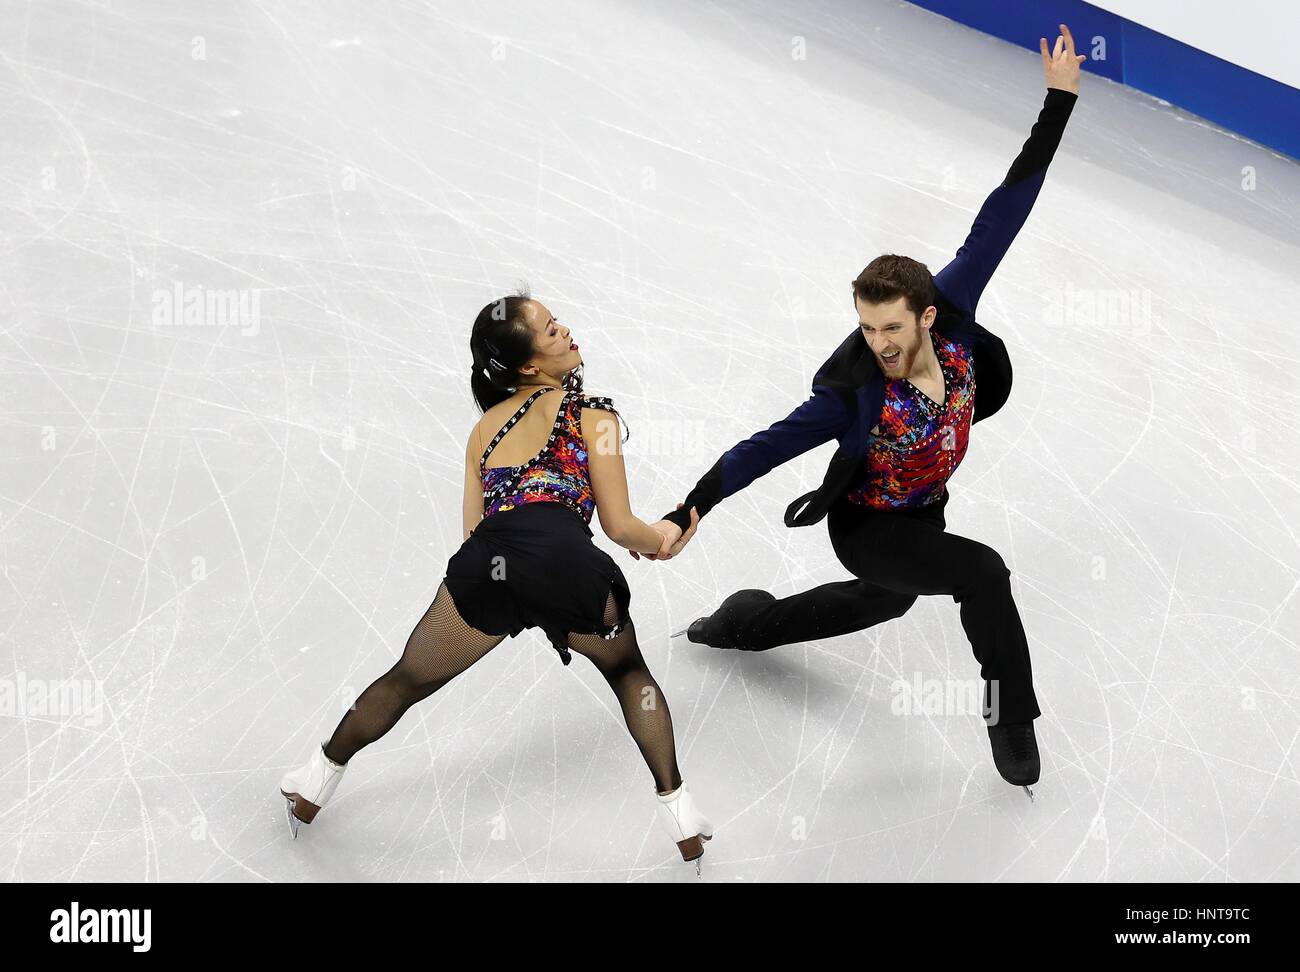 Yura Min and Alexander Gamelin of South Korea compete in the Pairs Short Program during ISU Four Continents Figure Skating Championships Test Event For PyeongChang 2018 Winter Olympics at Gangneung Ice Arena February 16, 2017 in Gangneung, South Korea. The event is being held one year before the start of the 2018 Winter Olympic Games in PyeongChang.   (Jeon Han/Koreanet via Planetpix) Stock Photo